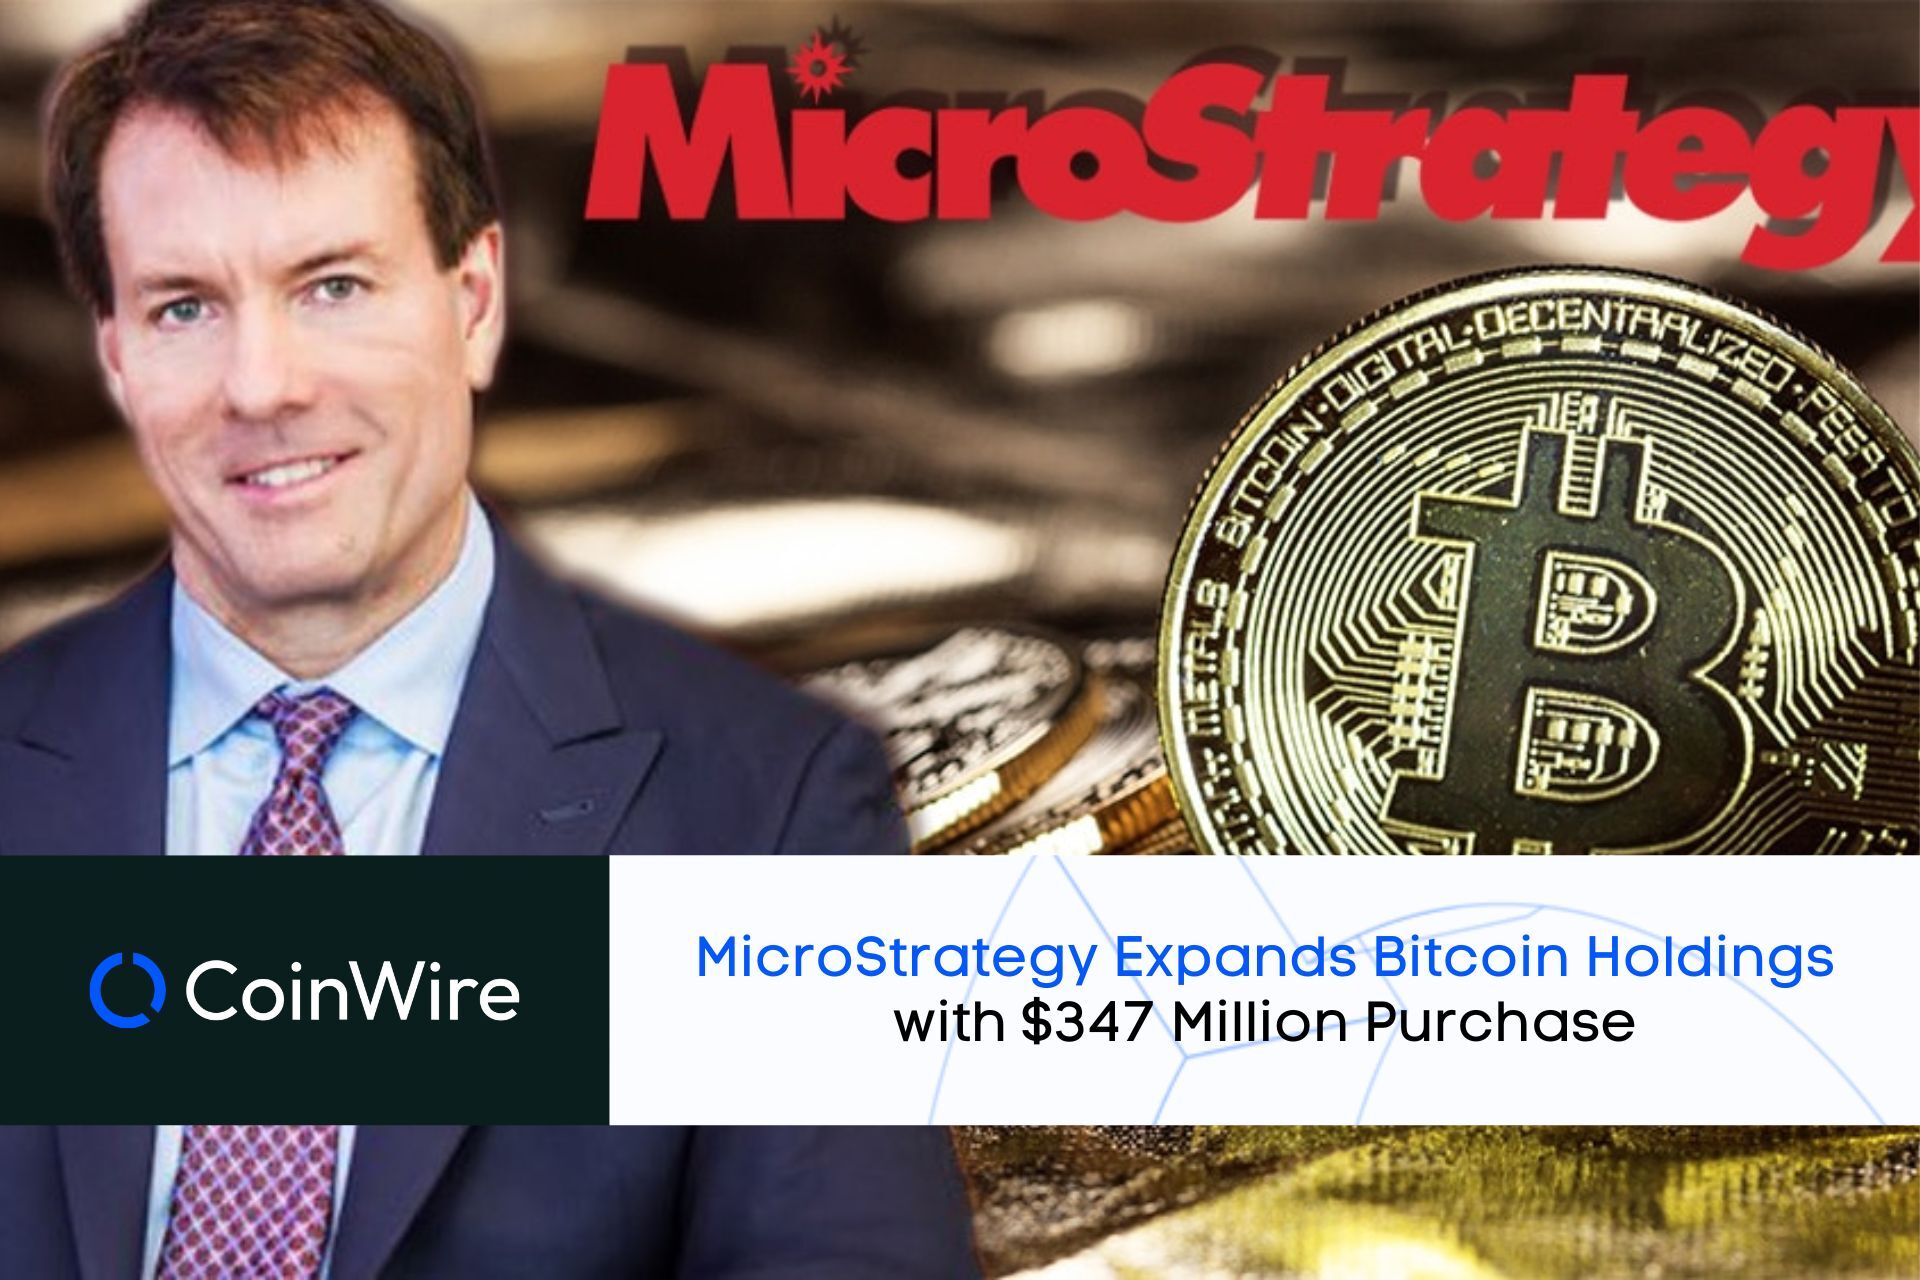 Microstrategy Expands Bitcoin Holdings With $347 Million Purchase